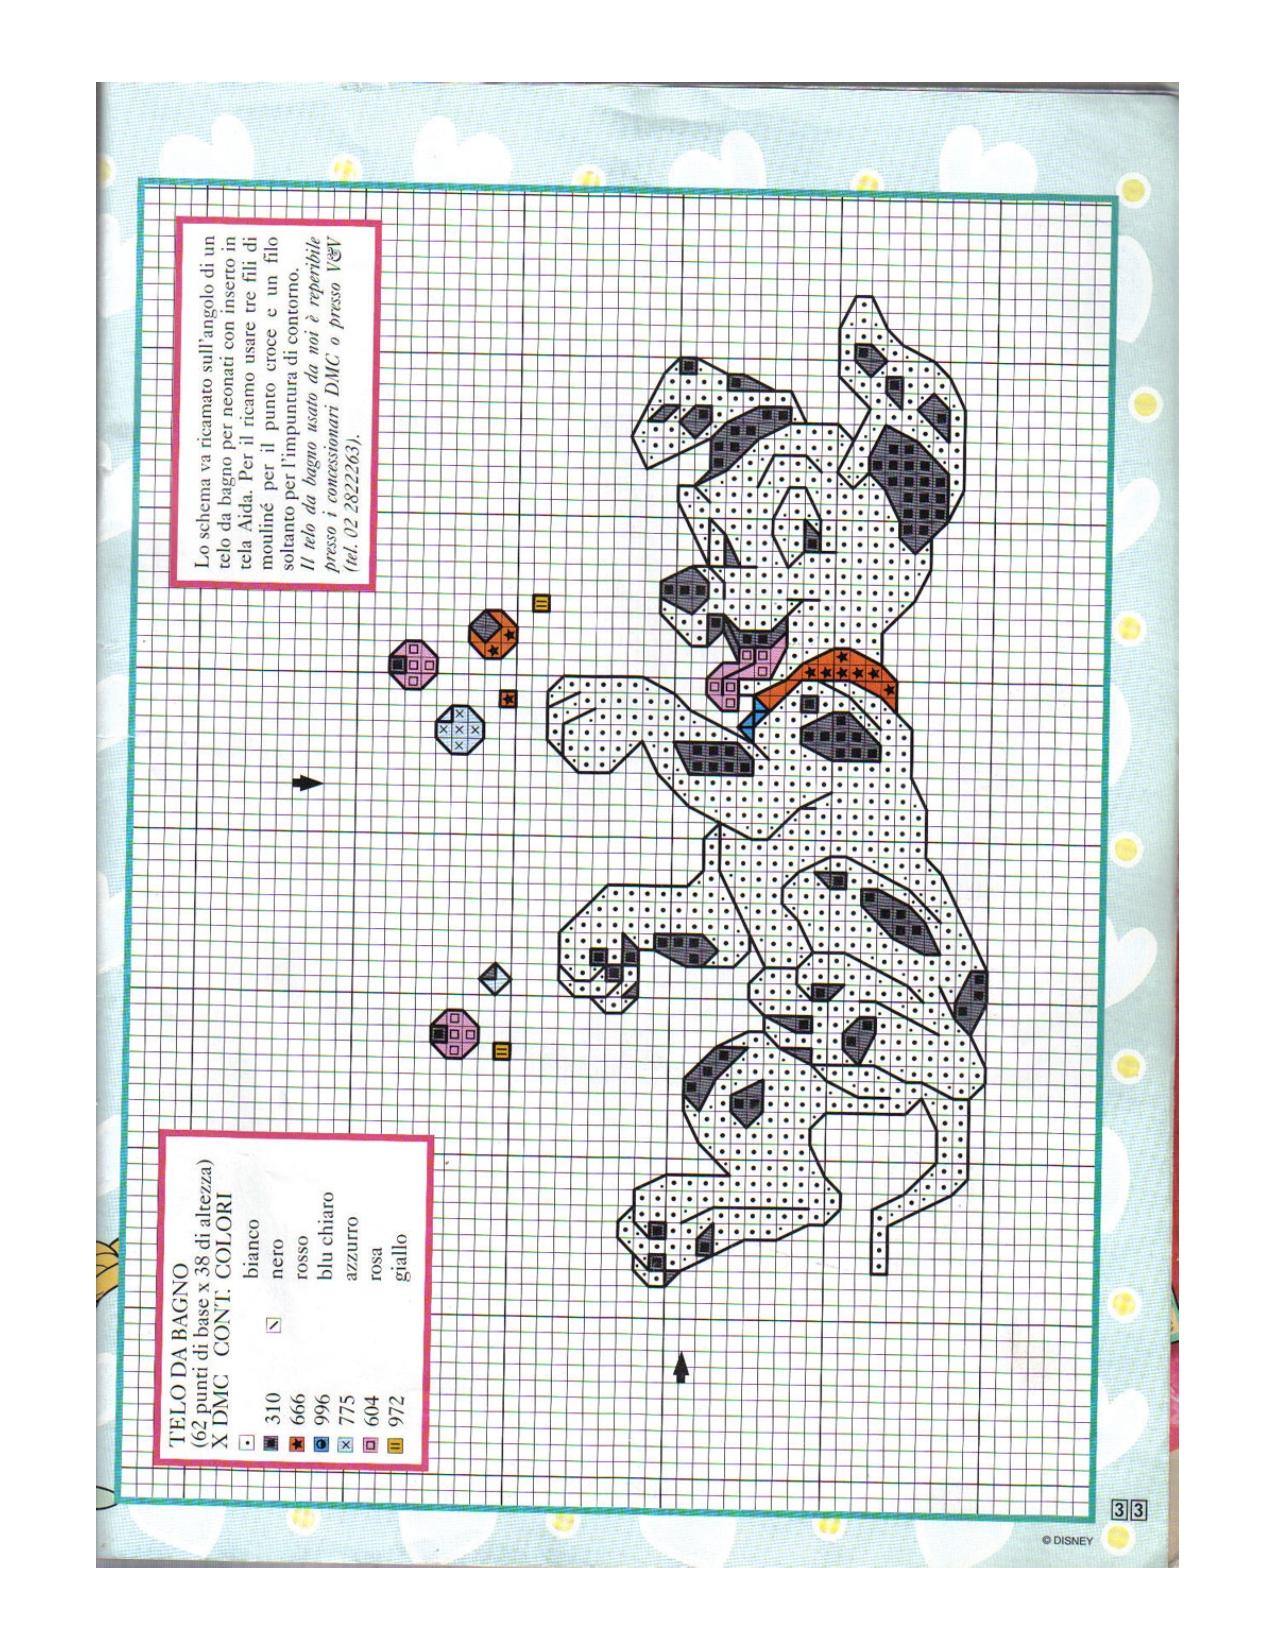 Various cross stitch patterns of One Hundred and One Dalmatians (3)